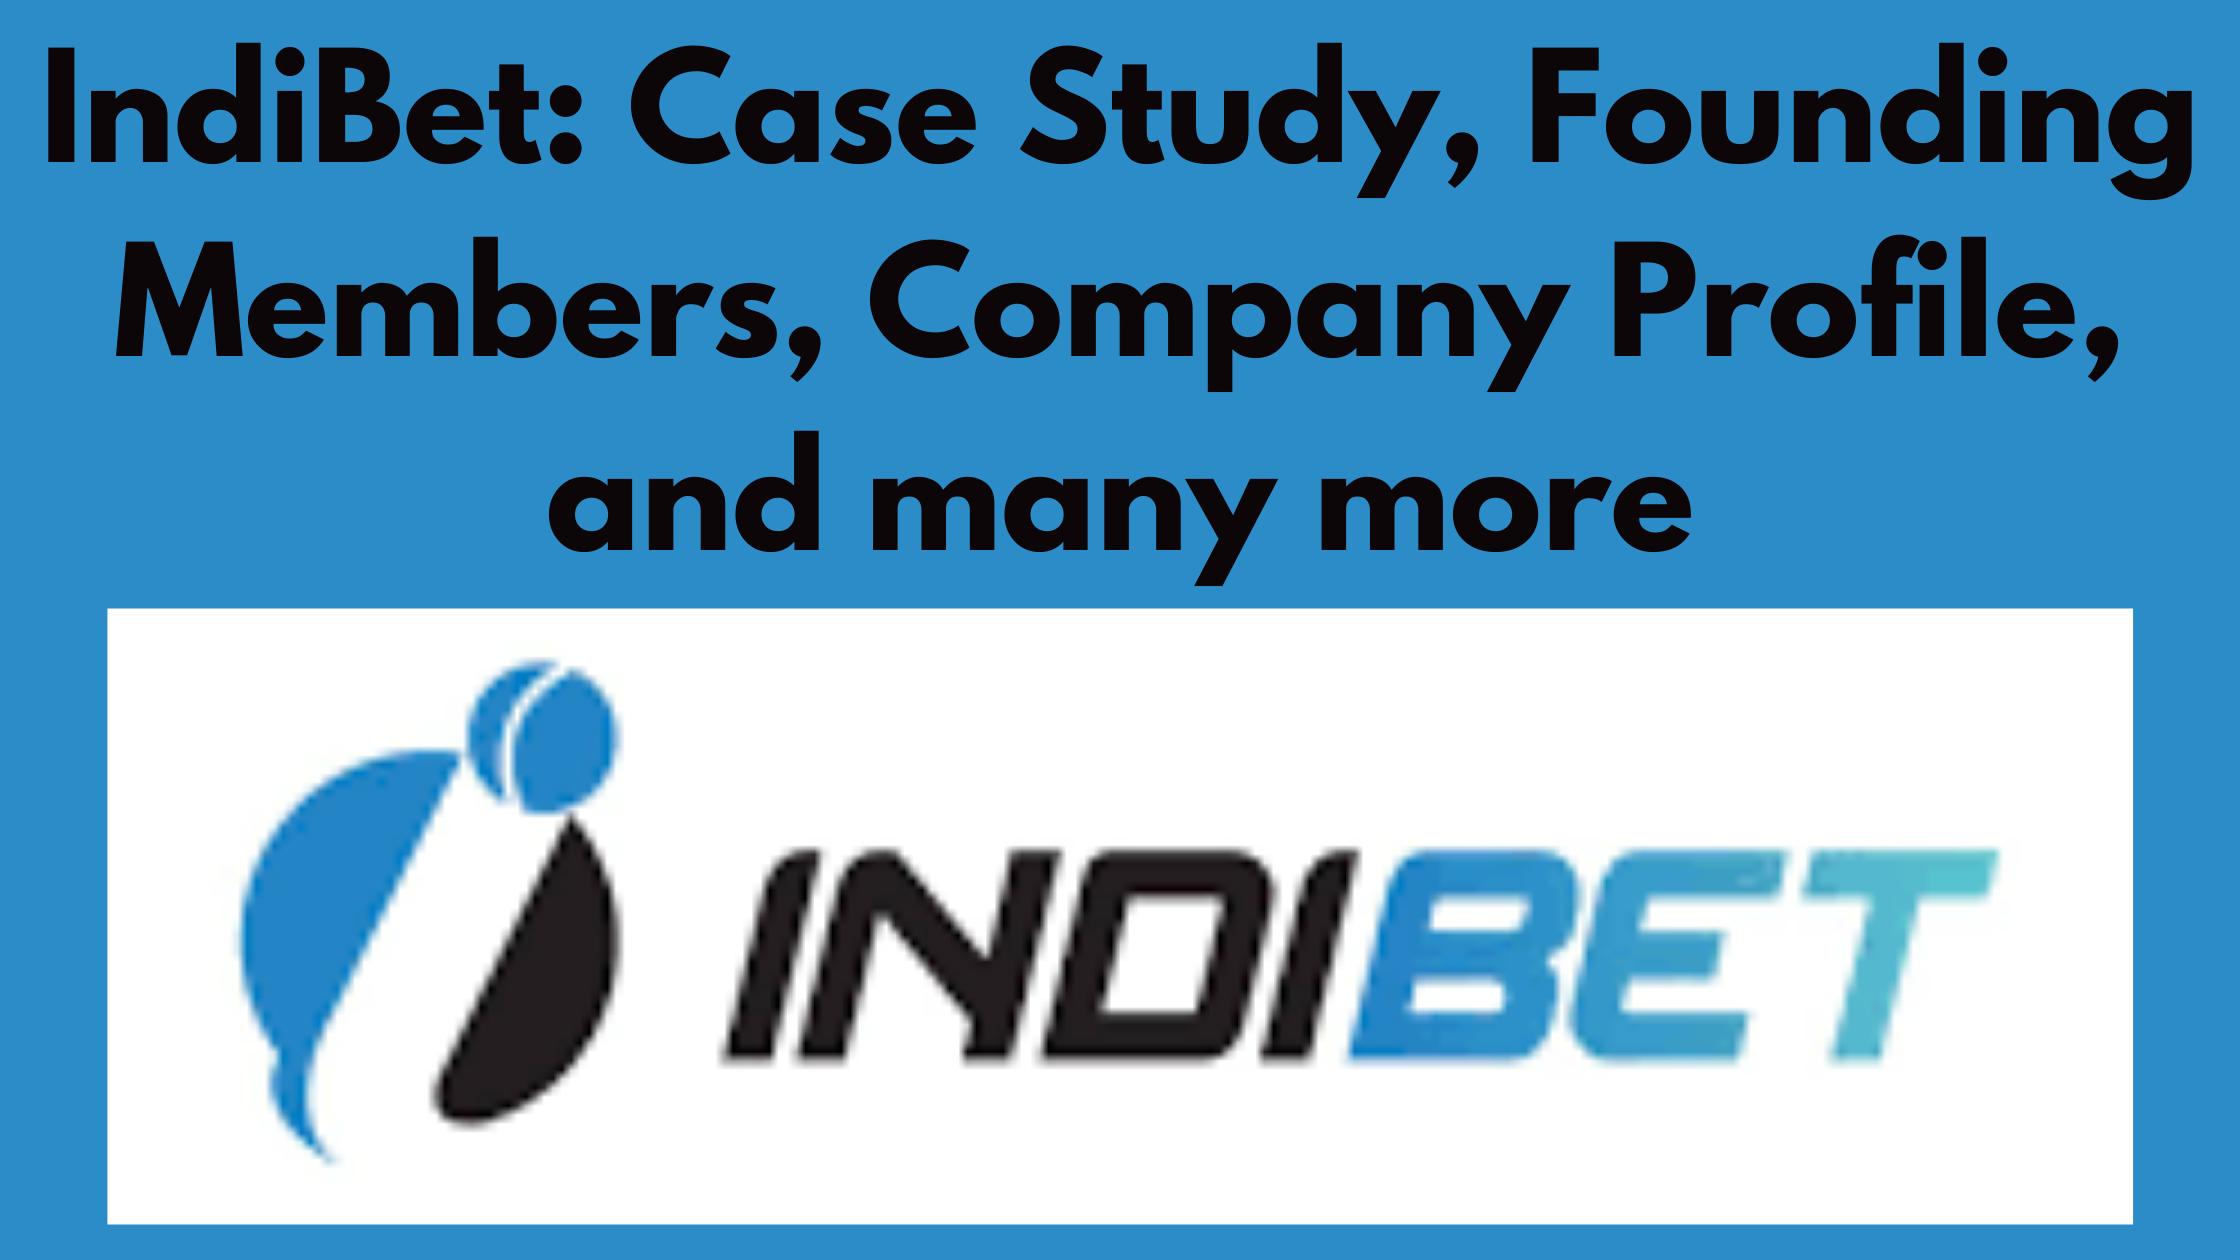 IndiBet: Case Study, Founding Members, Company Profile, and many more